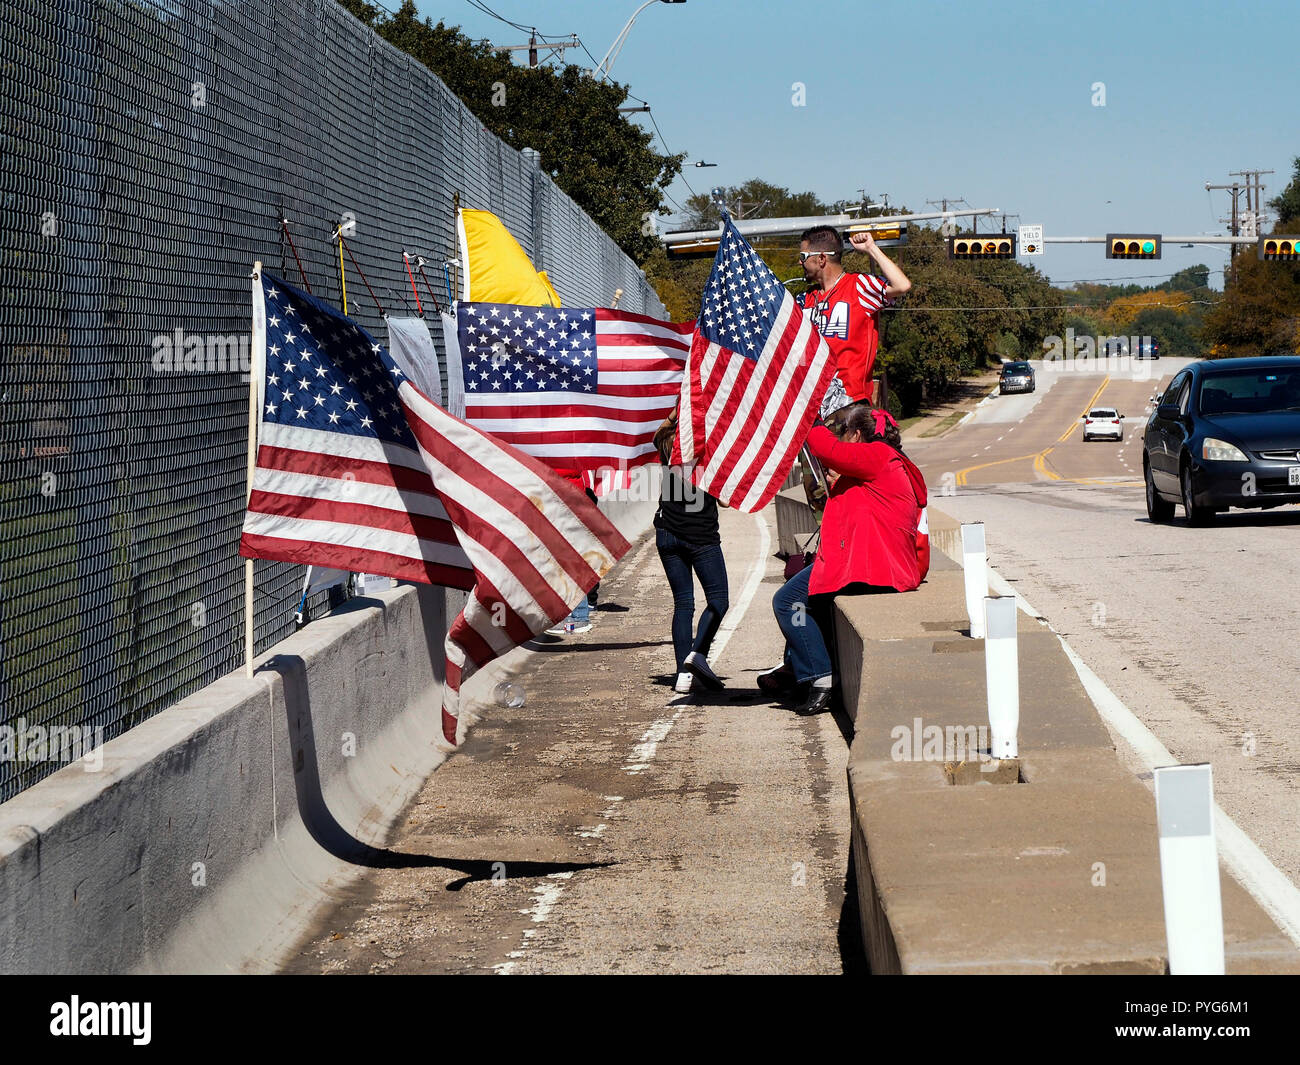 Half-dozen demonstrators of the conservative group calling themselves as 'Overpass for America' strive to call attention to Republican candidates. Seeing a big lead for re-electing Texas governor, they focus on U.S. senate race between Ted Cruz and Beto O'Rourke. Overpass in Arlington Texas near Fort Worth, overlooking Interstate highway I-20.On the overpass David Stained, of Fort Worth, Texas says this is the third weekend they have demonstrated from an overpass and plan on doing it again in Fort Worth next weekend. Semi's and autos honk support for the demonstrators. Stock Photo